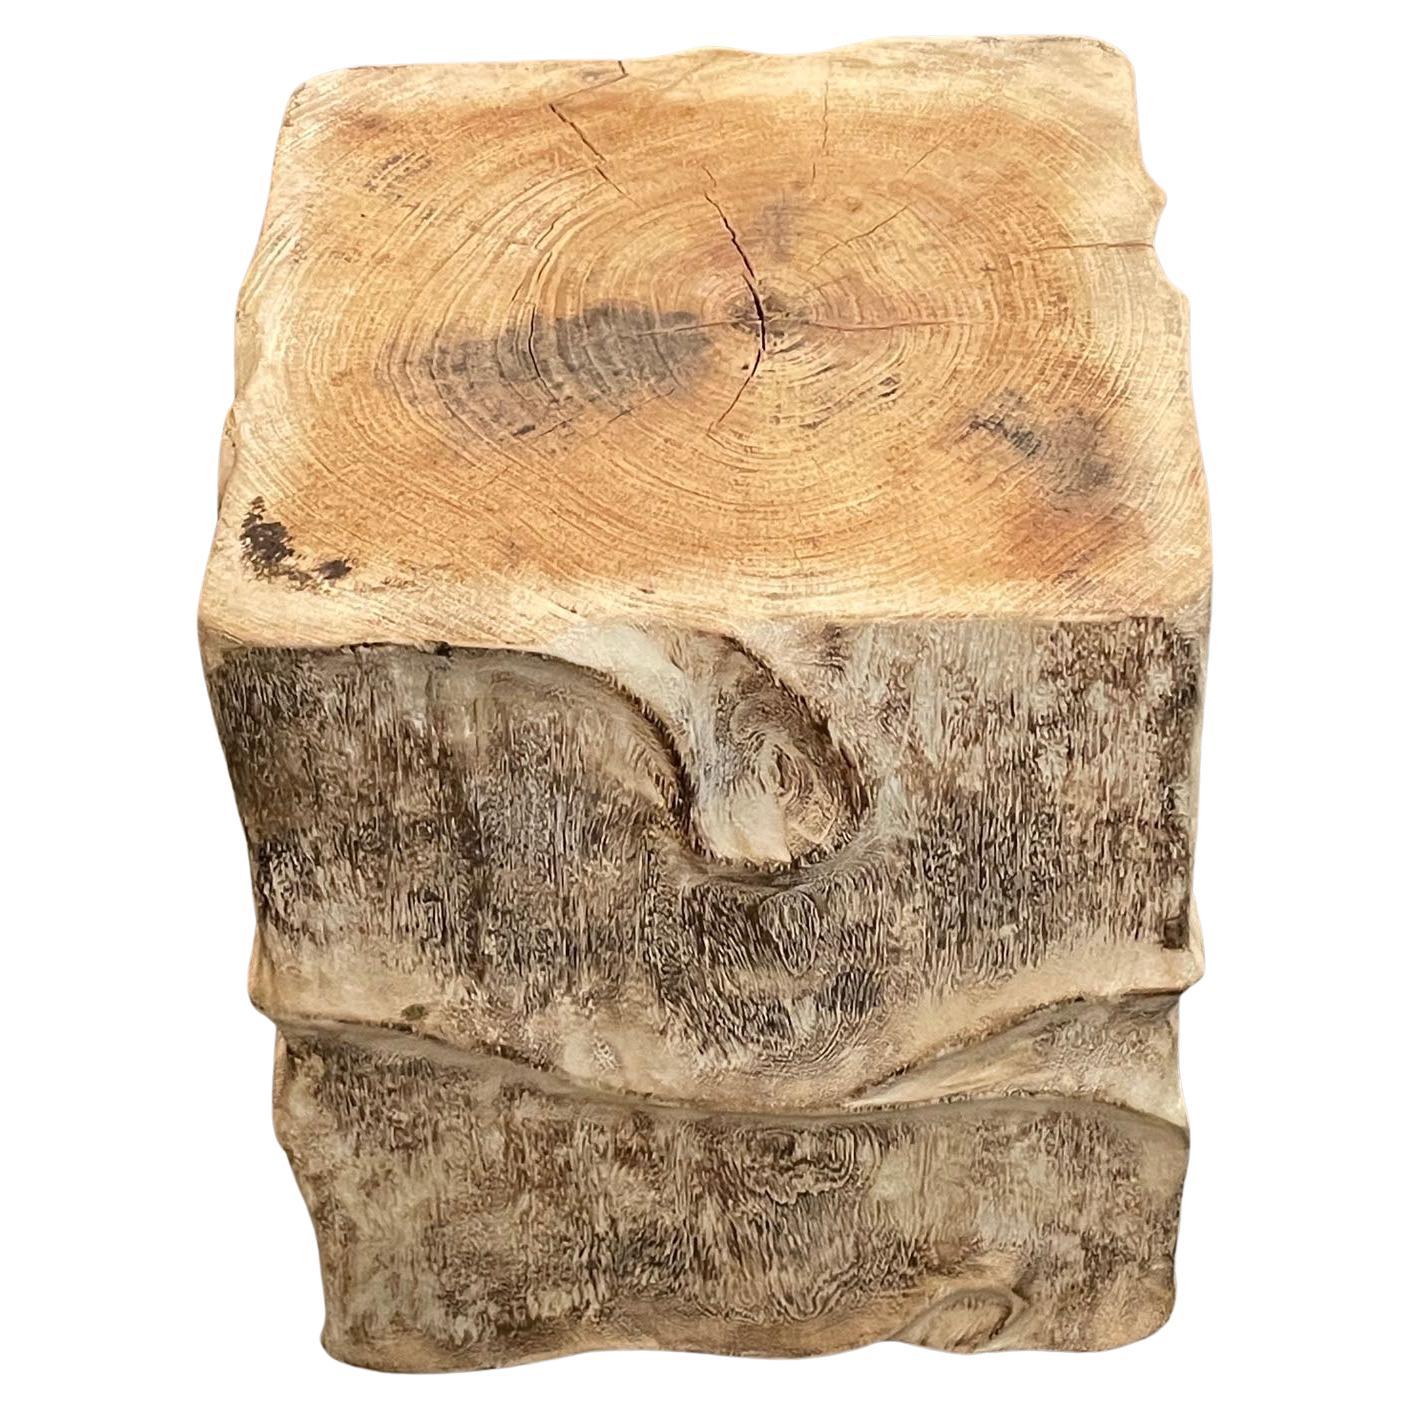 Bleached Square Shape Suar Wood Side Table, Indonesia, Contemporary